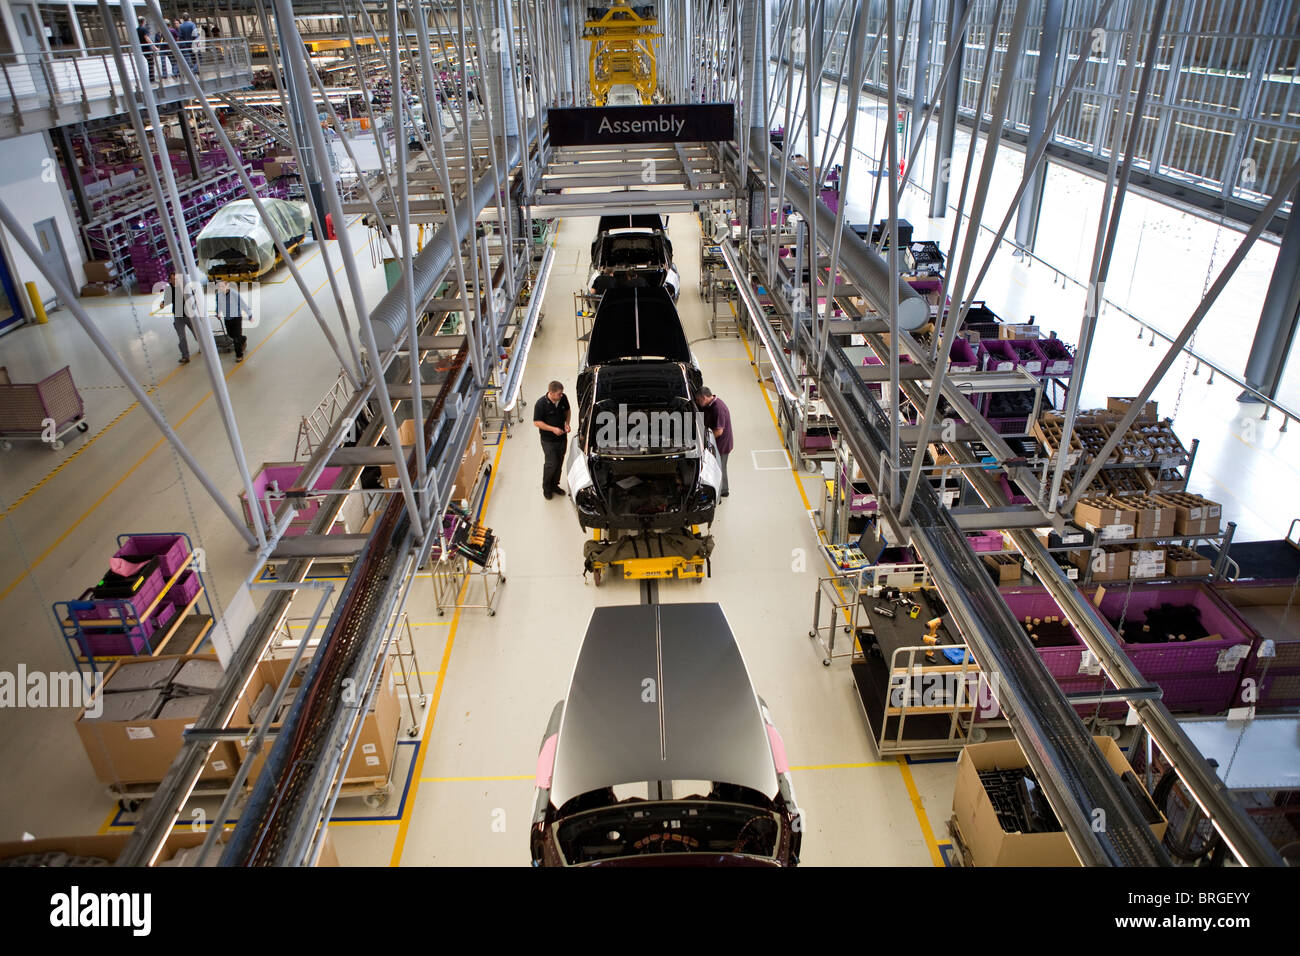 Rolls Royce factory in Goodwood, West Sussex UK Production line for Rolls Royce Phantom and Ghost cars. Stock Photo